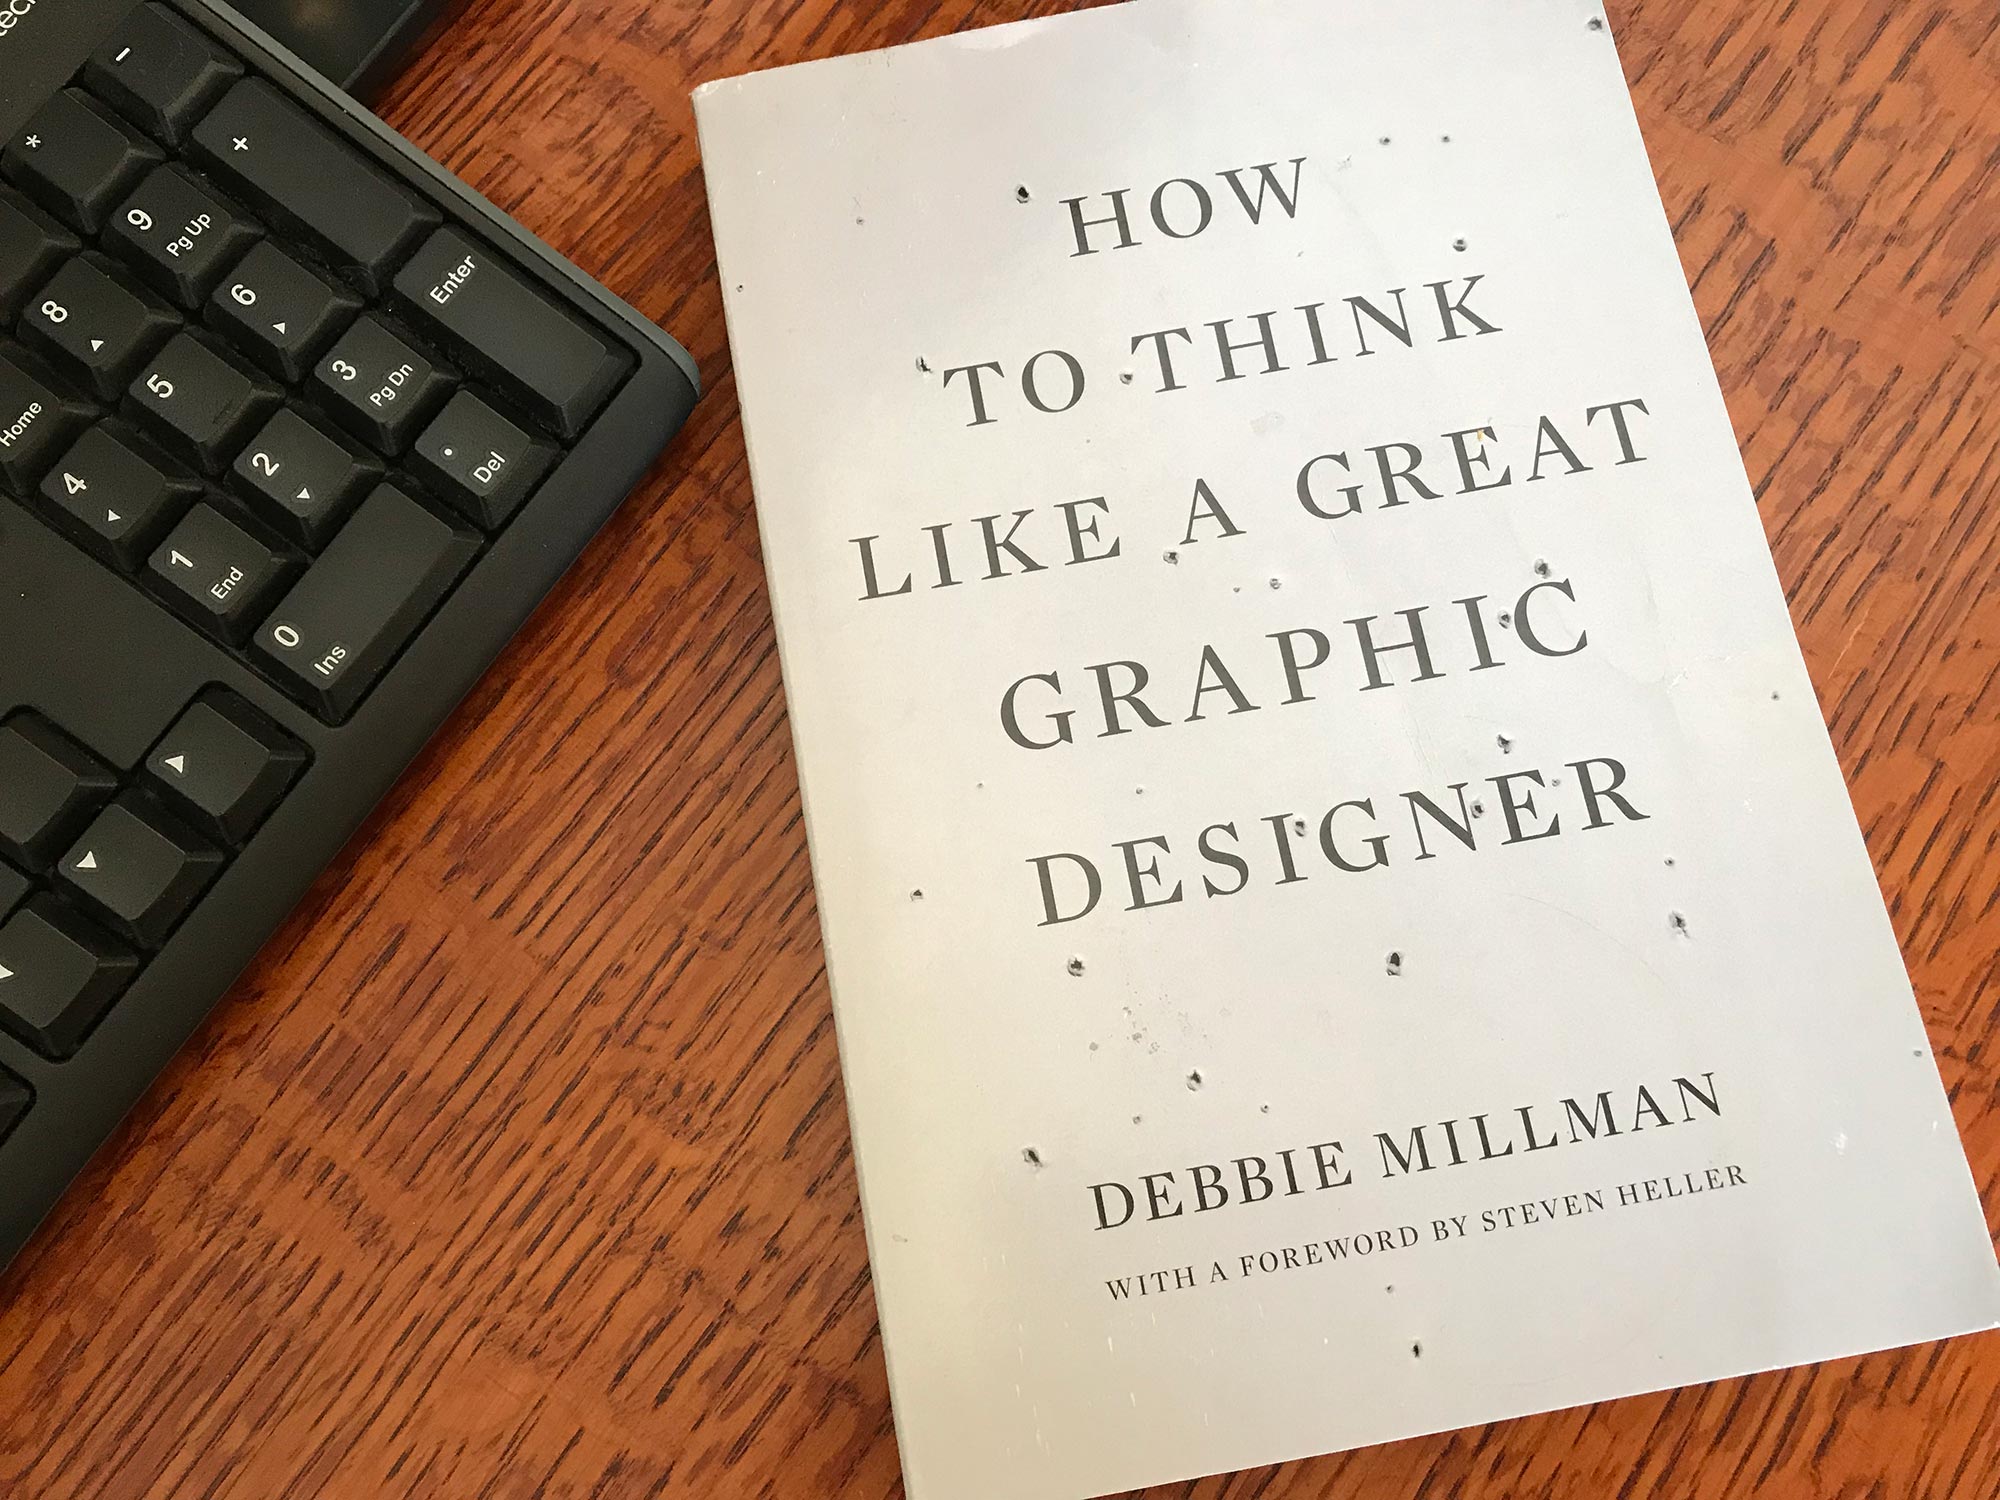 “How to Think Like a Great Graphic Designer” by Debbie Millman